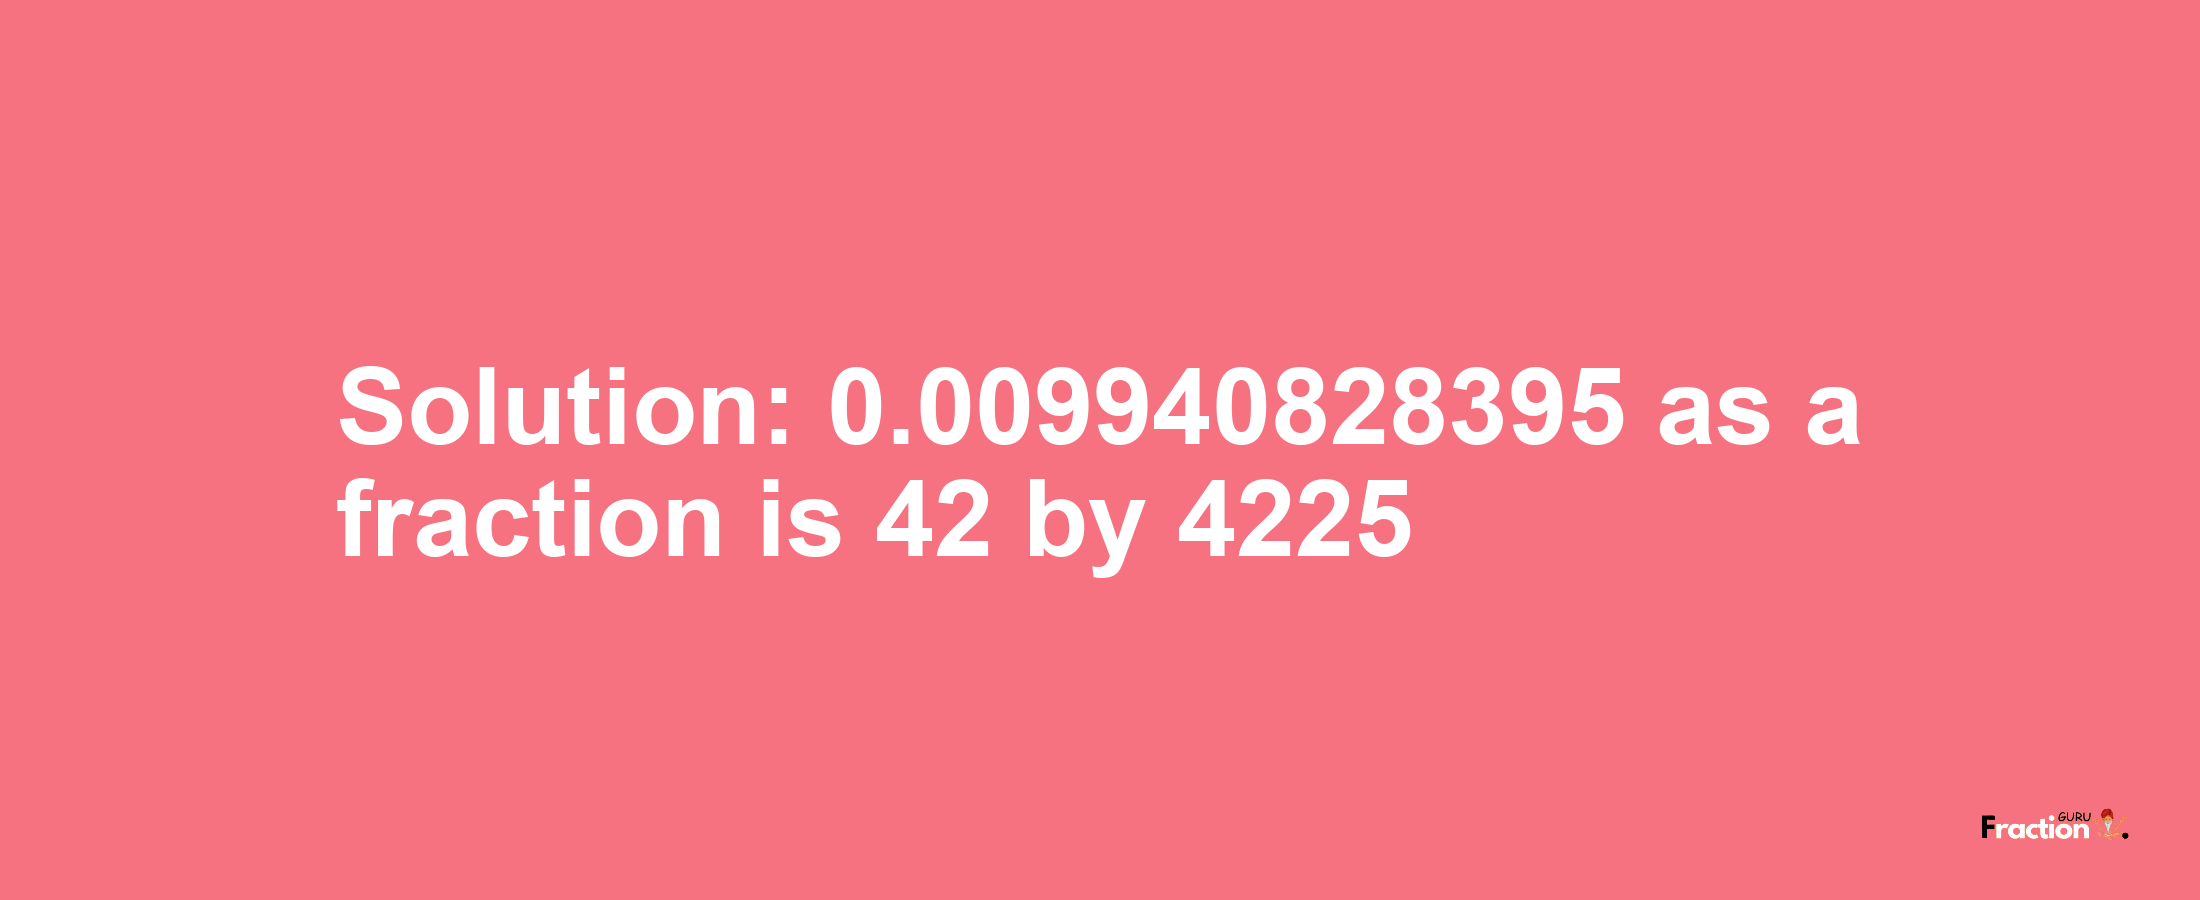 Solution:0.009940828395 as a fraction is 42/4225